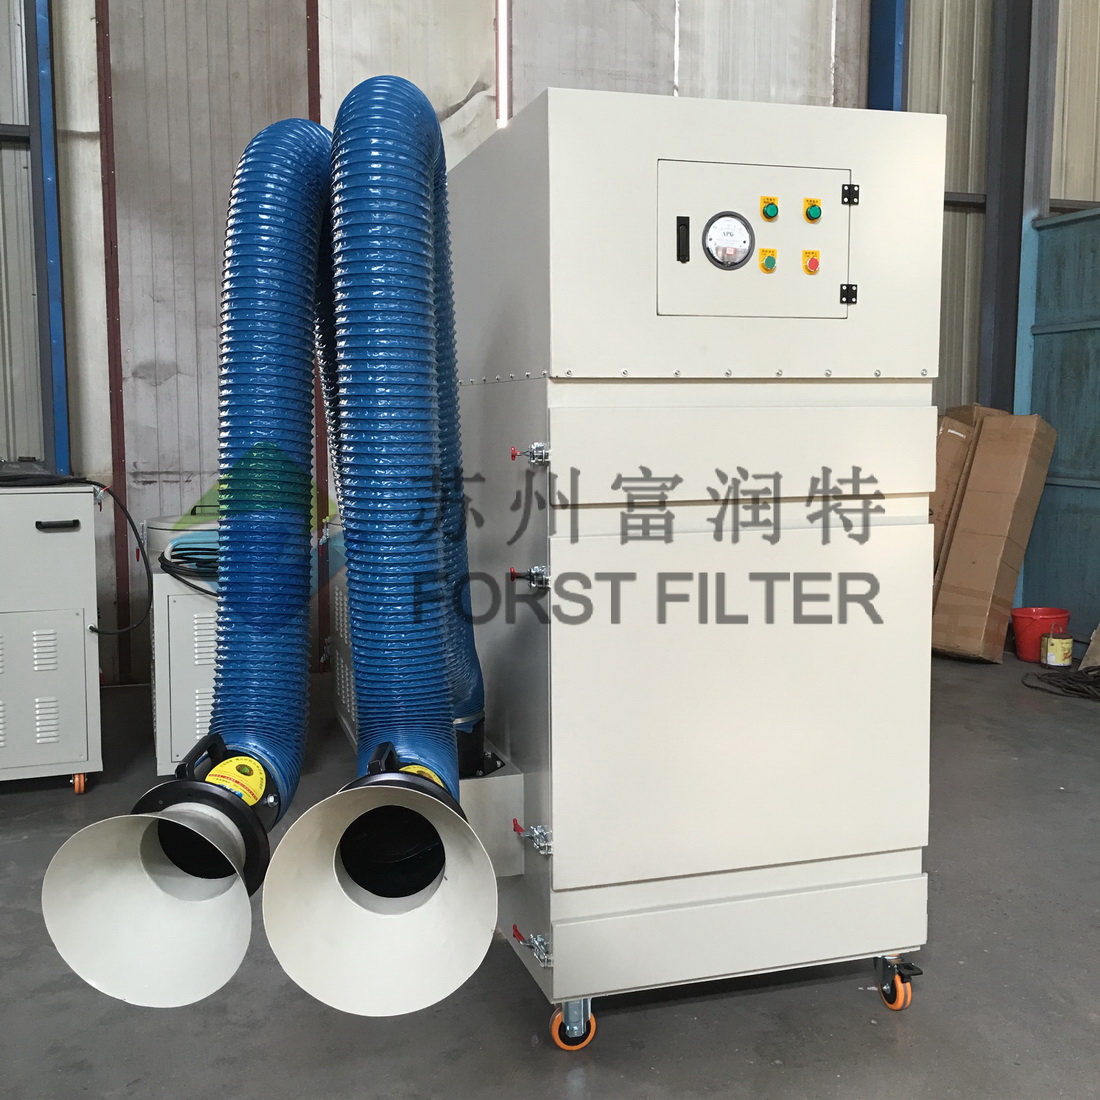 Portable Dust Collector With Suction Arm